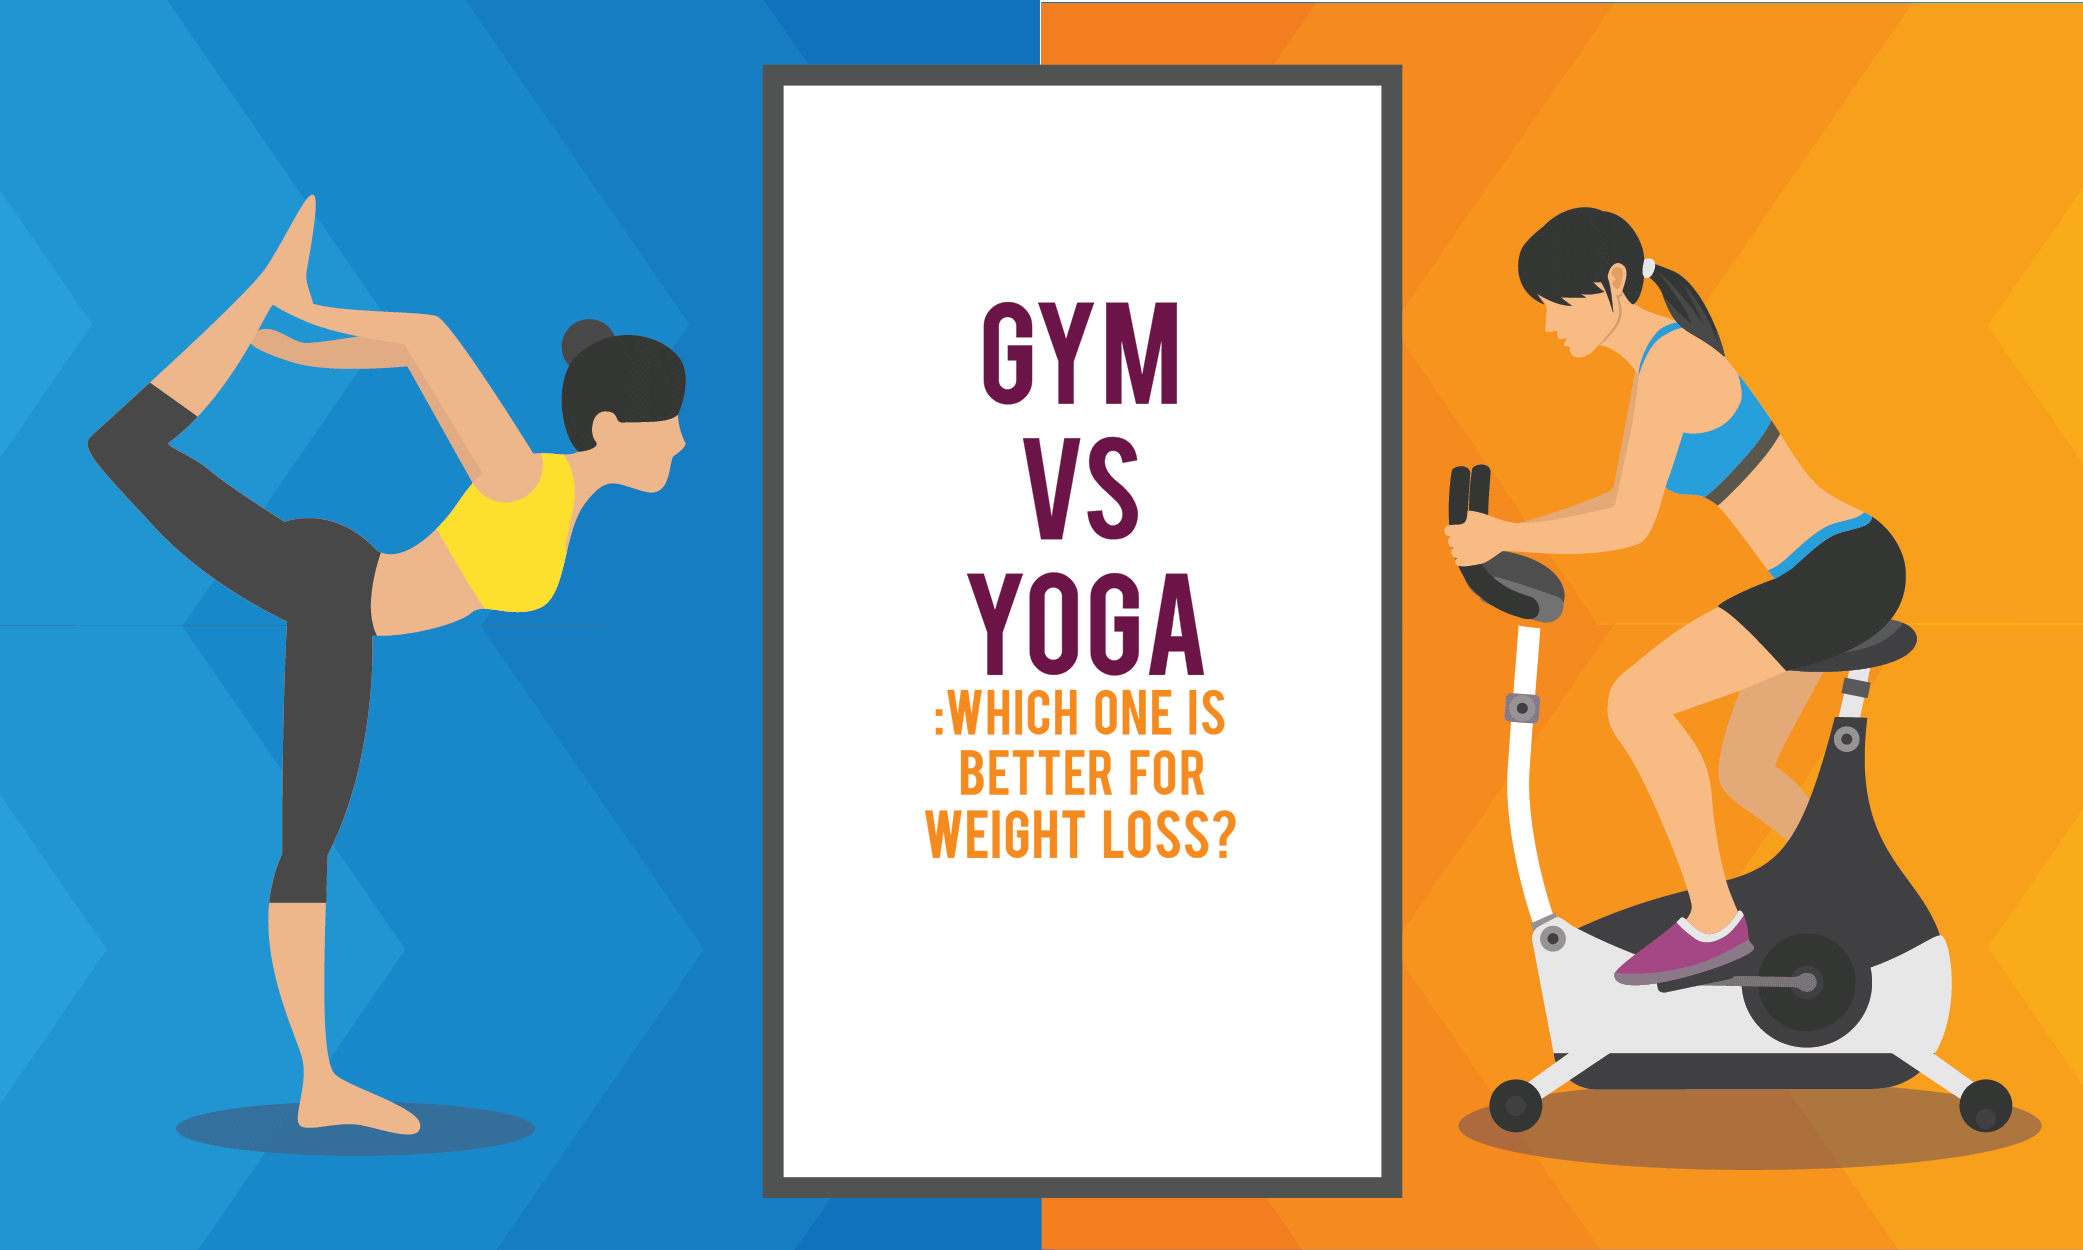 Gym-vs-Yoga-Which-One-is-Better-for-Weight-Loss